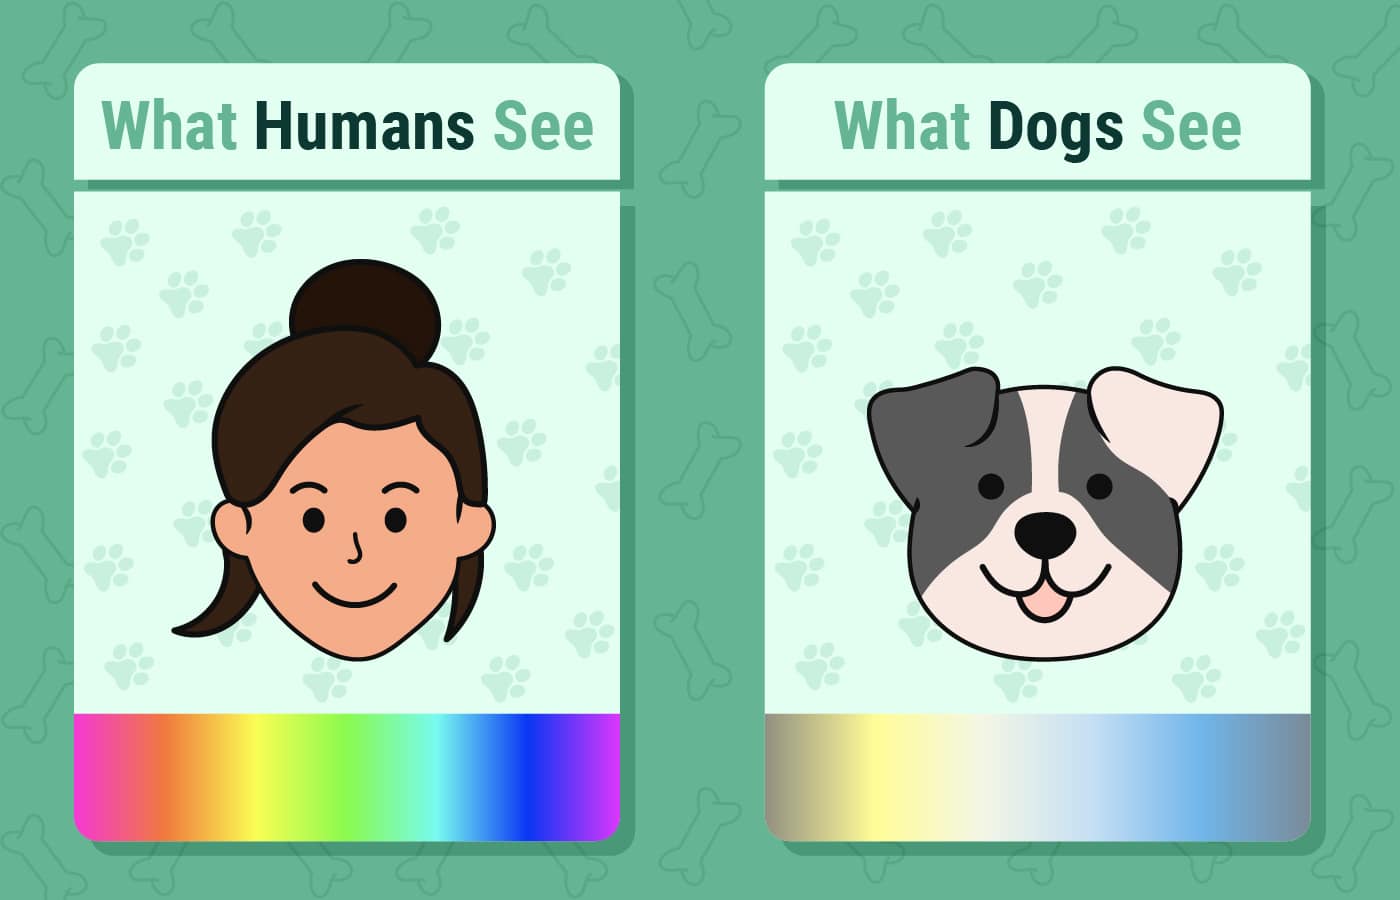 PetKeen_What Dogs See VS What Humans See_Infographic_v3_Apr 28 2023 (1)